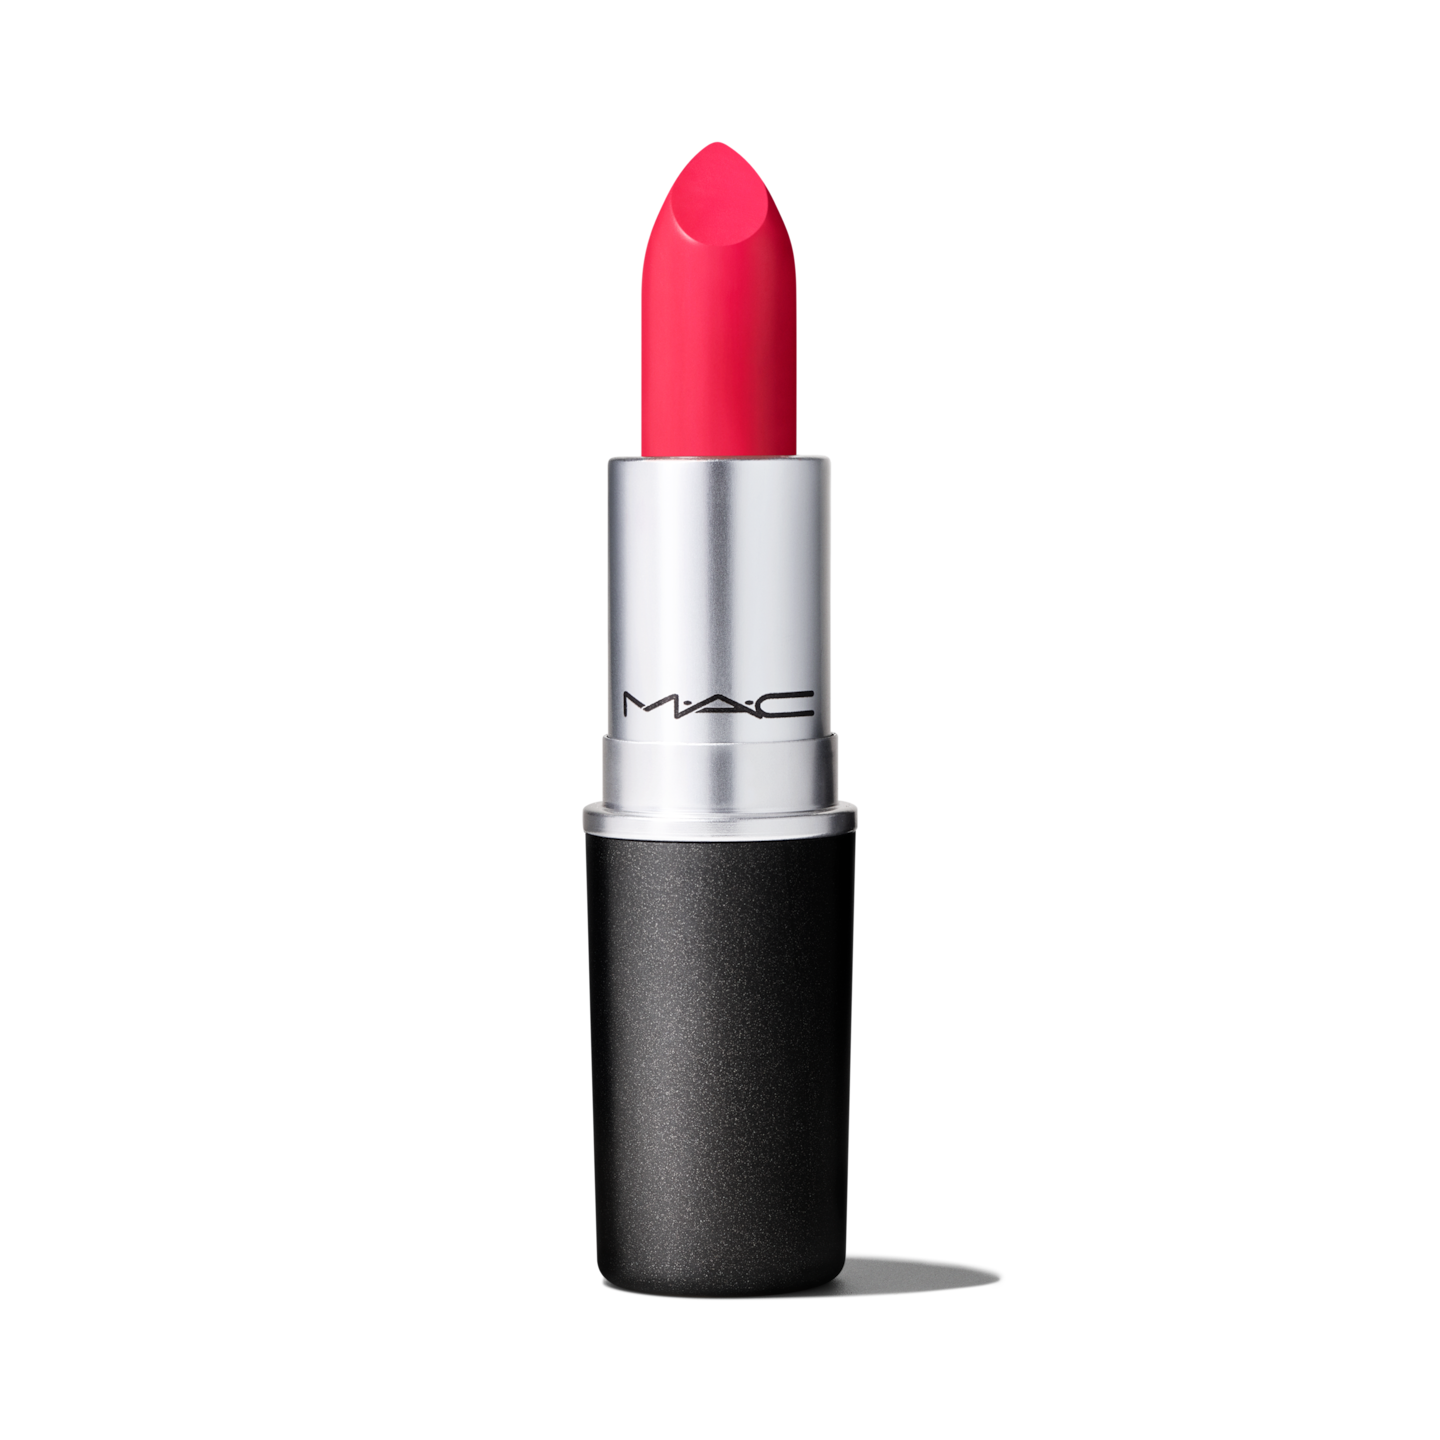 Mac in Egypt - Yash MATTE MAC lipstick is now available by order, whatsapp  or contact 01225500355 or 01227199625 for orders and details. Price 480LE